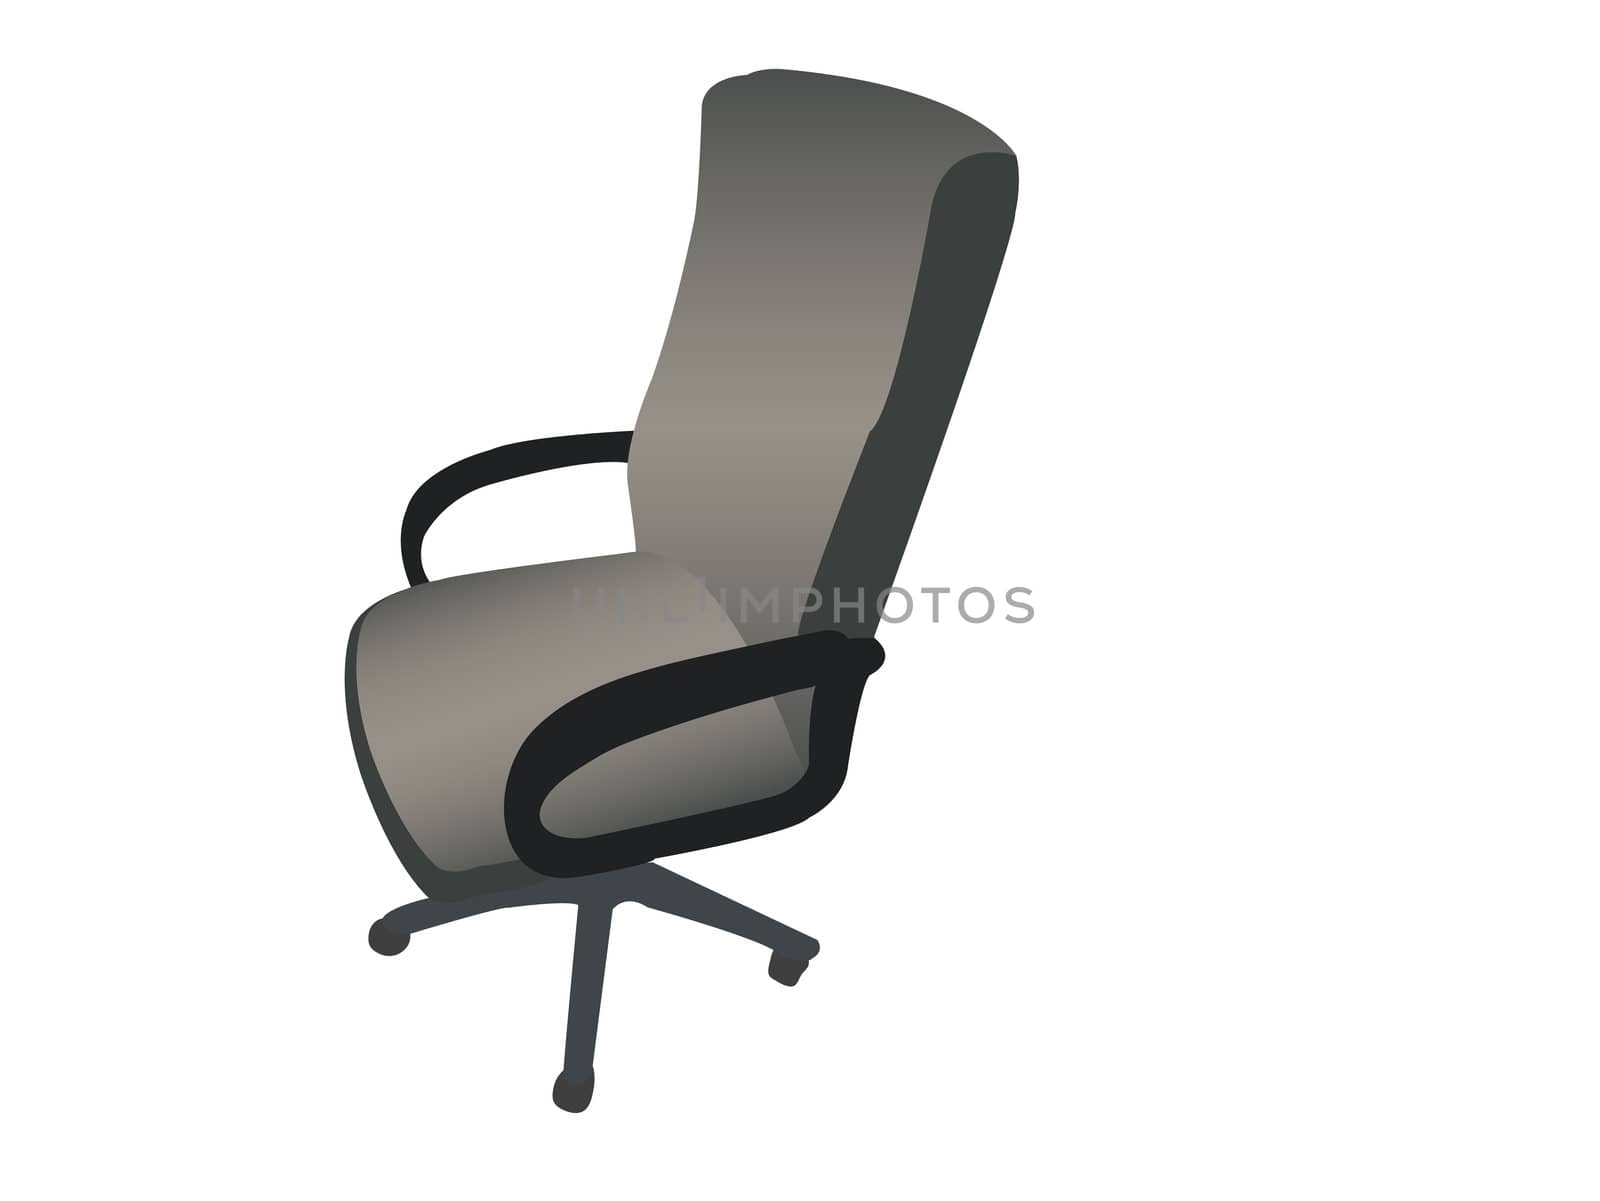 rotating arm chair against white background